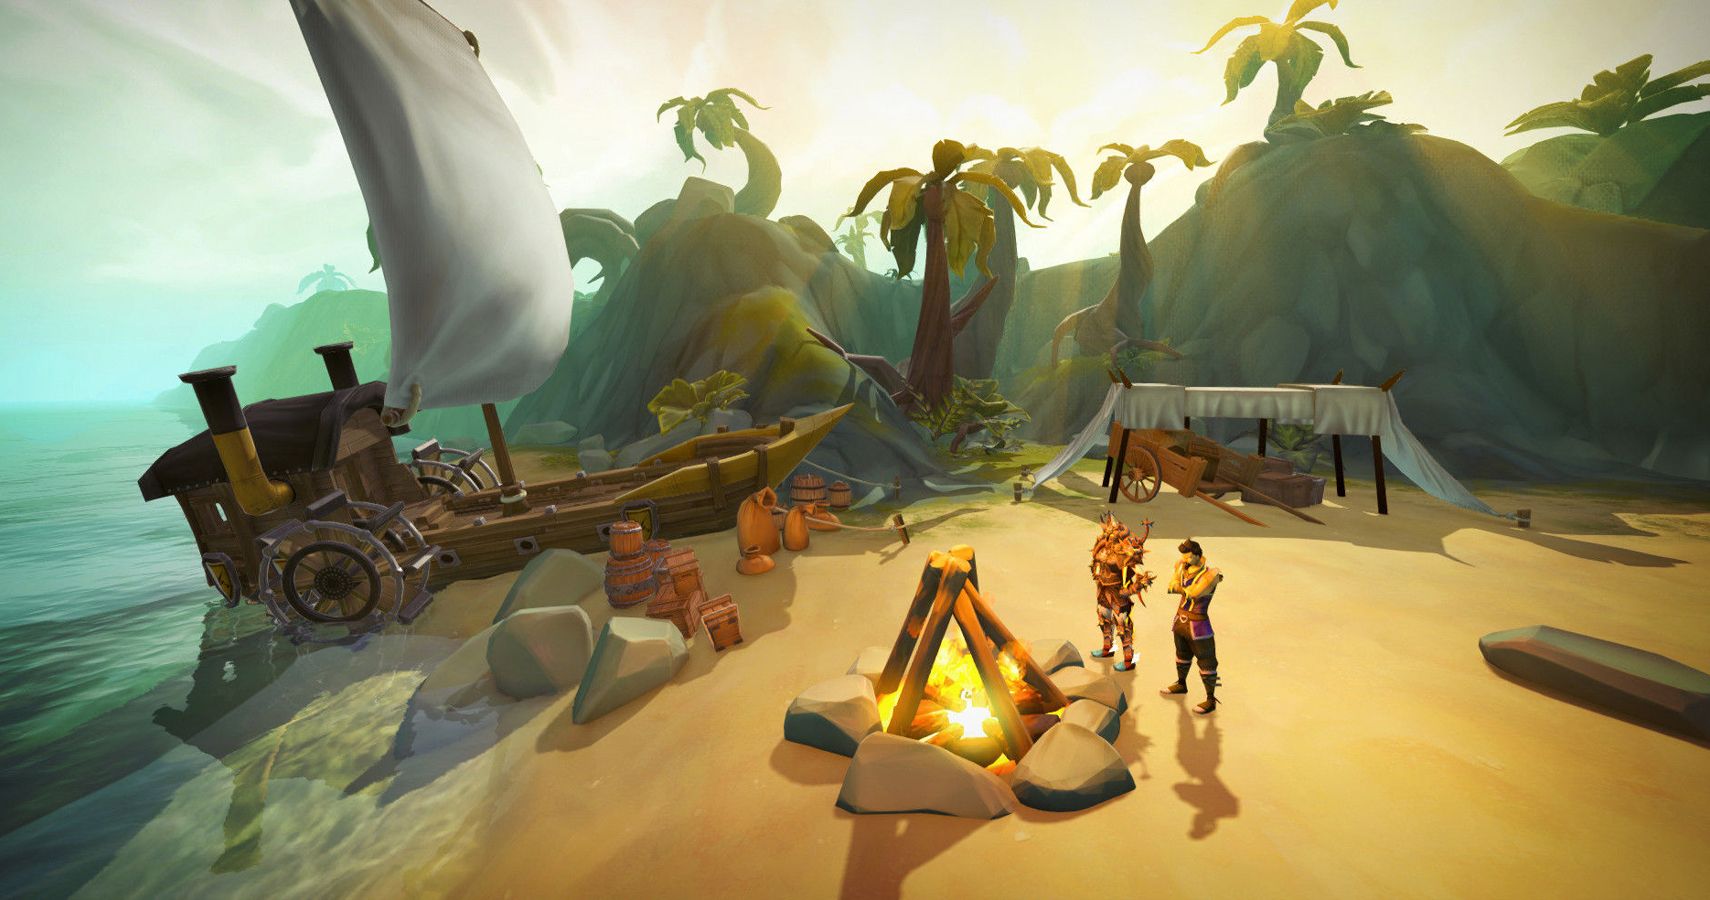 Old School Runescape' Available for IOS & Android